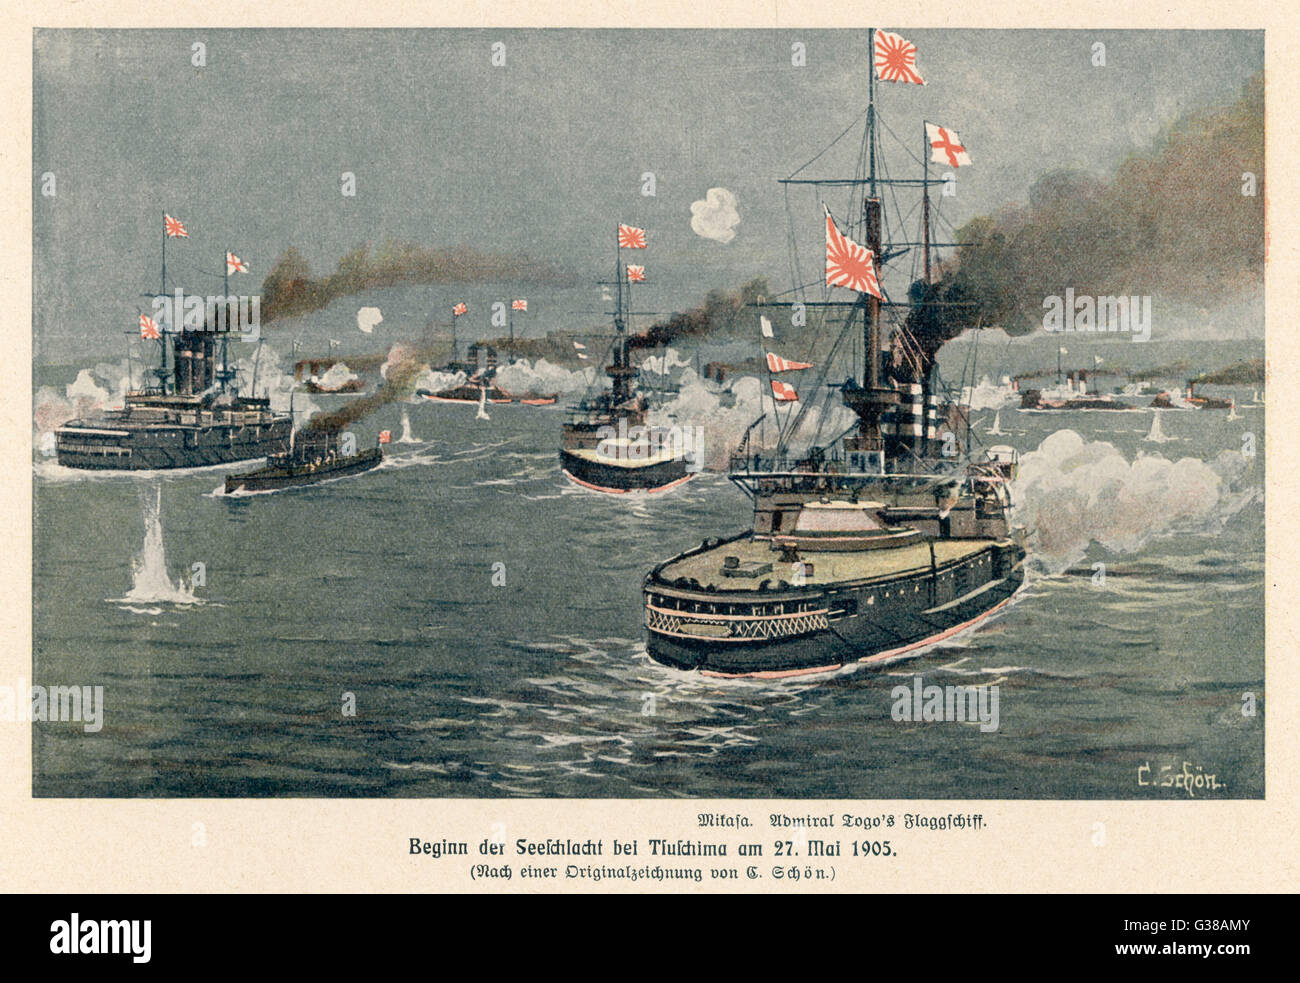 BATTLE OF TSUSHIMA STRAIT The Japanese Admiral Togo  steams into action in his  flagship 'Mikafa', inflicting  an overwhelming defeat on the  Russian fleet     Date: 27-28 May 1905 Stock Photo